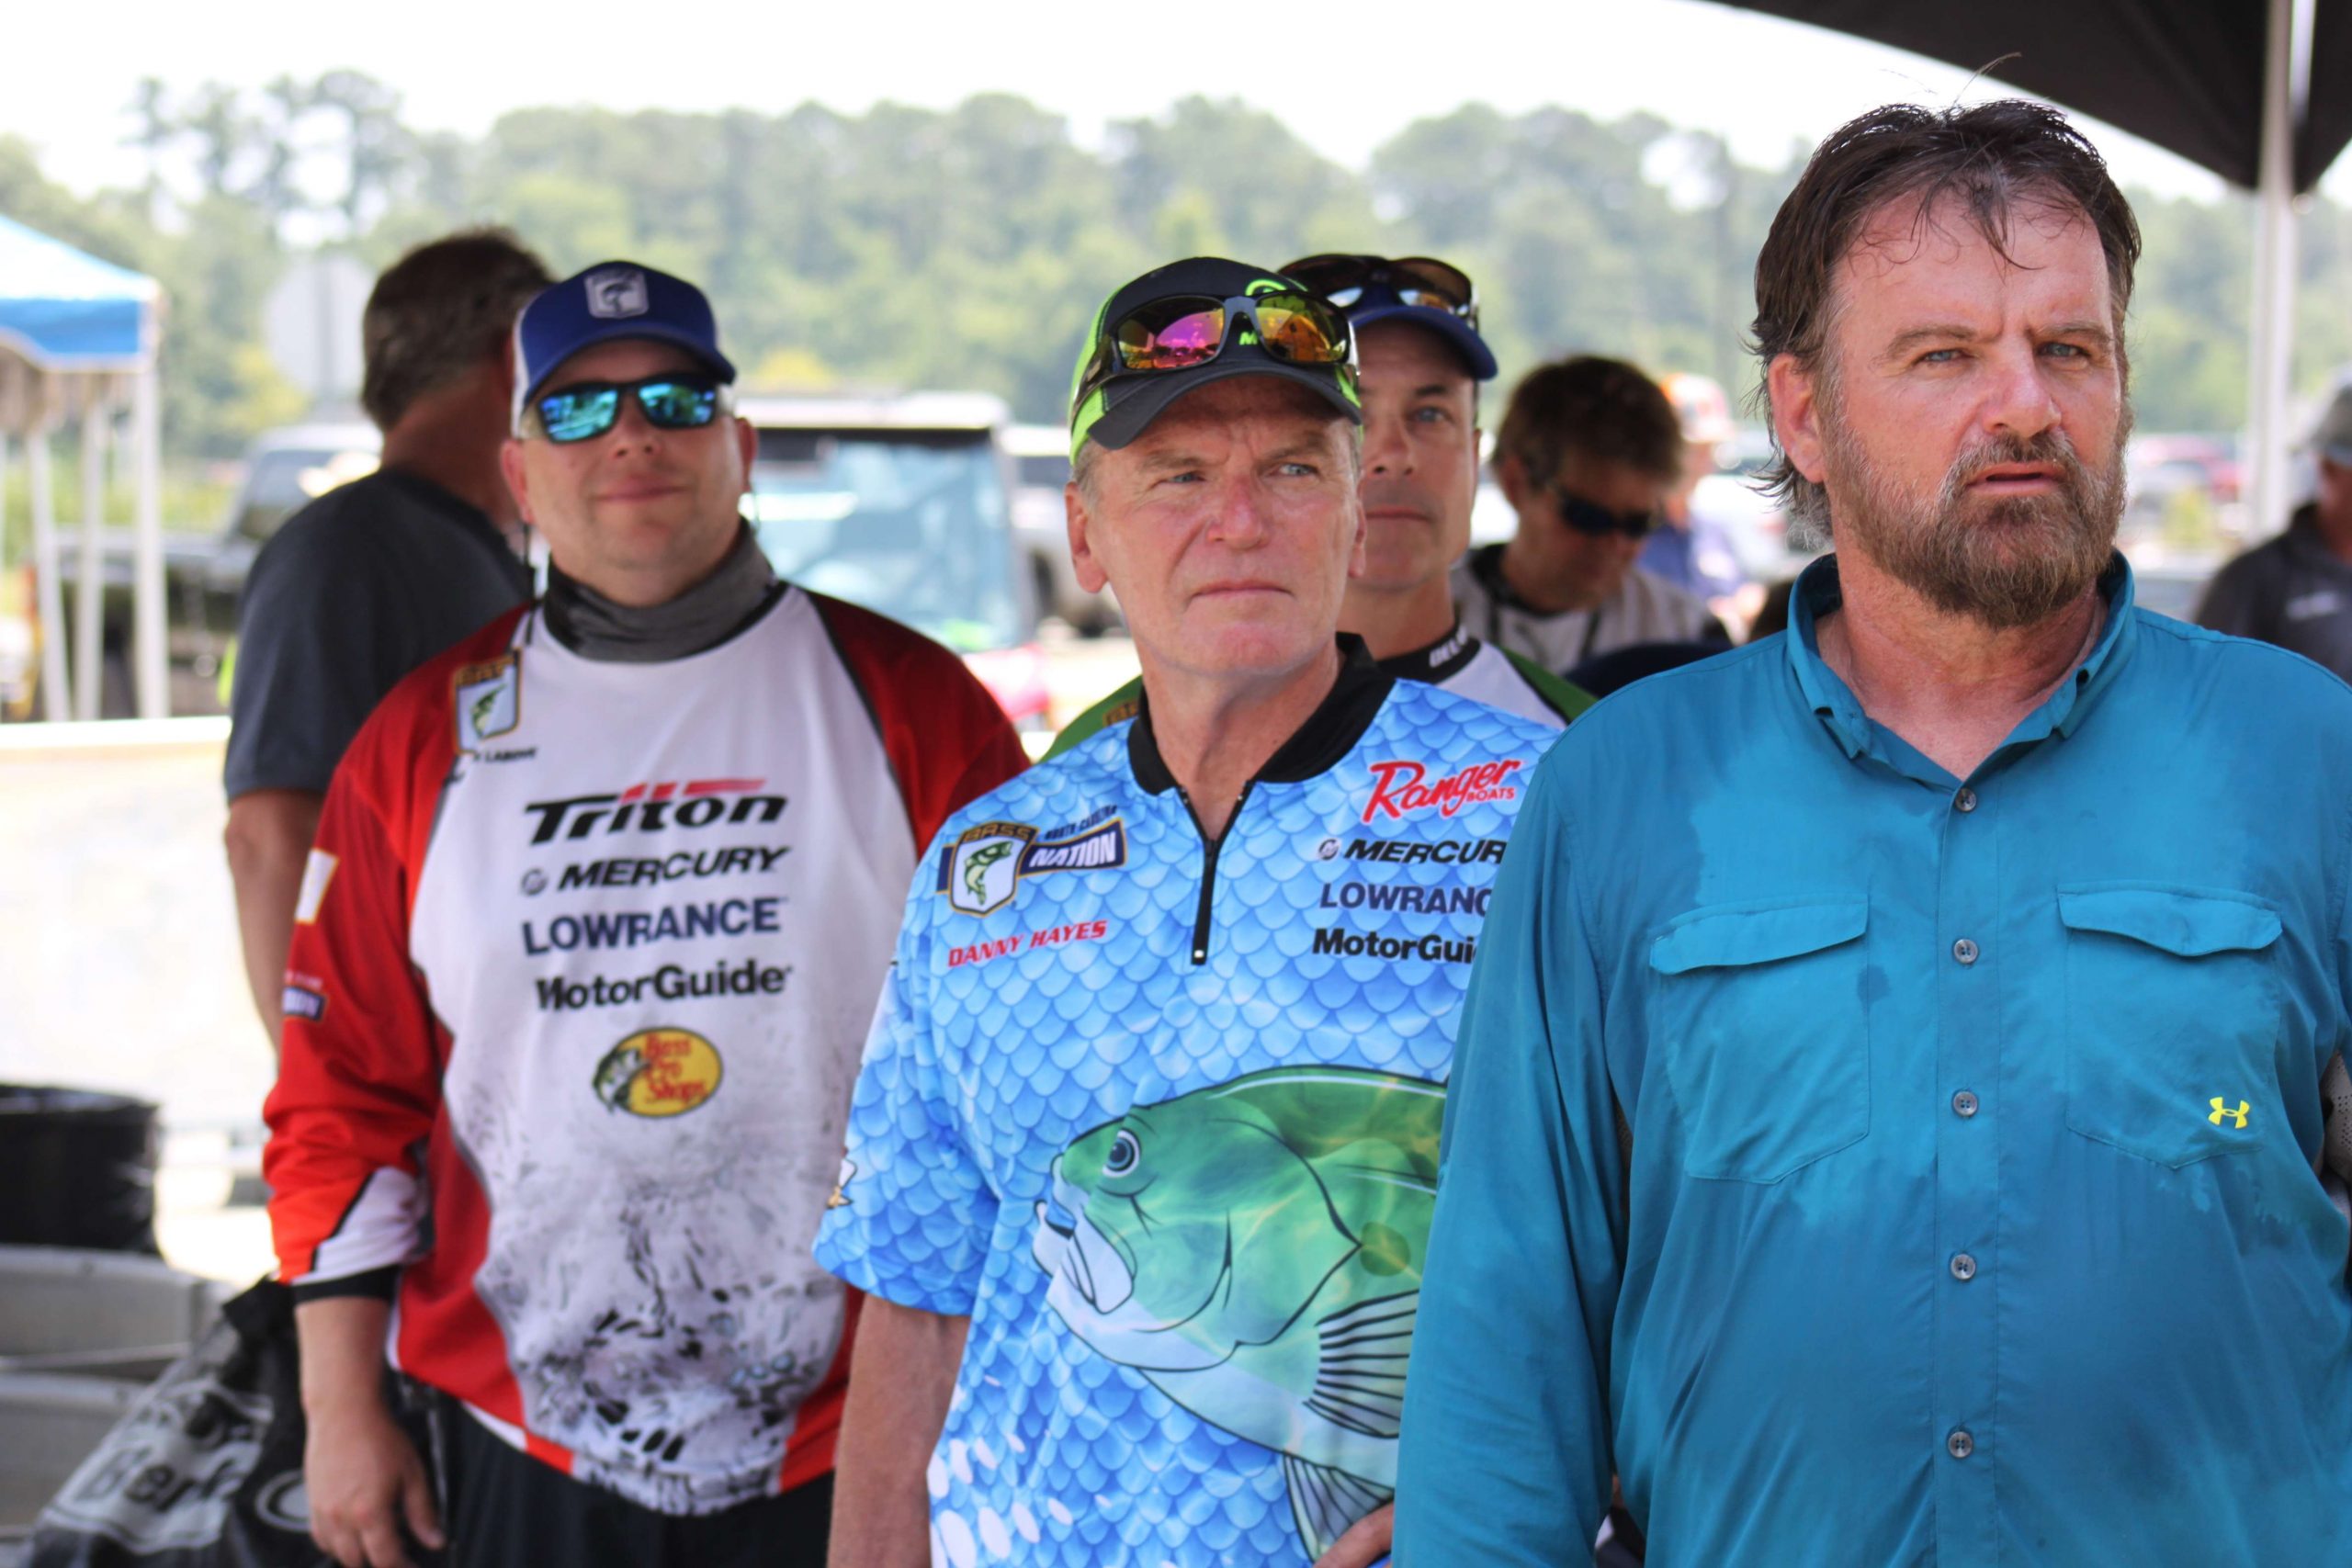 The first flight of anglers began gathering backstage at 2 p.m. 